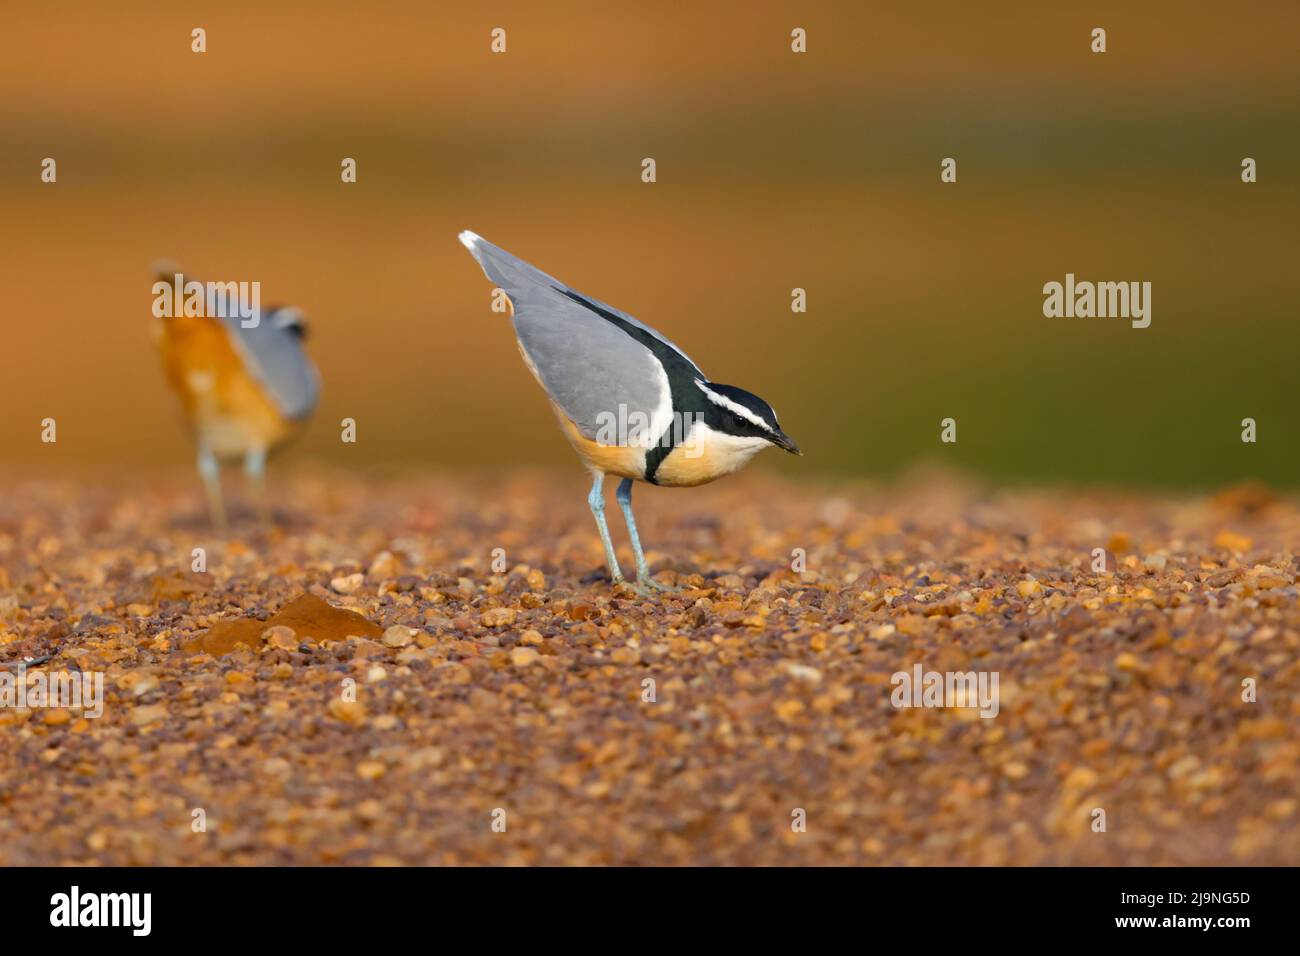 A pair of adult Egyptian Plovers (Pluvianus aegyptius) on the shore of the River Gambia in Senegal Stock Photo